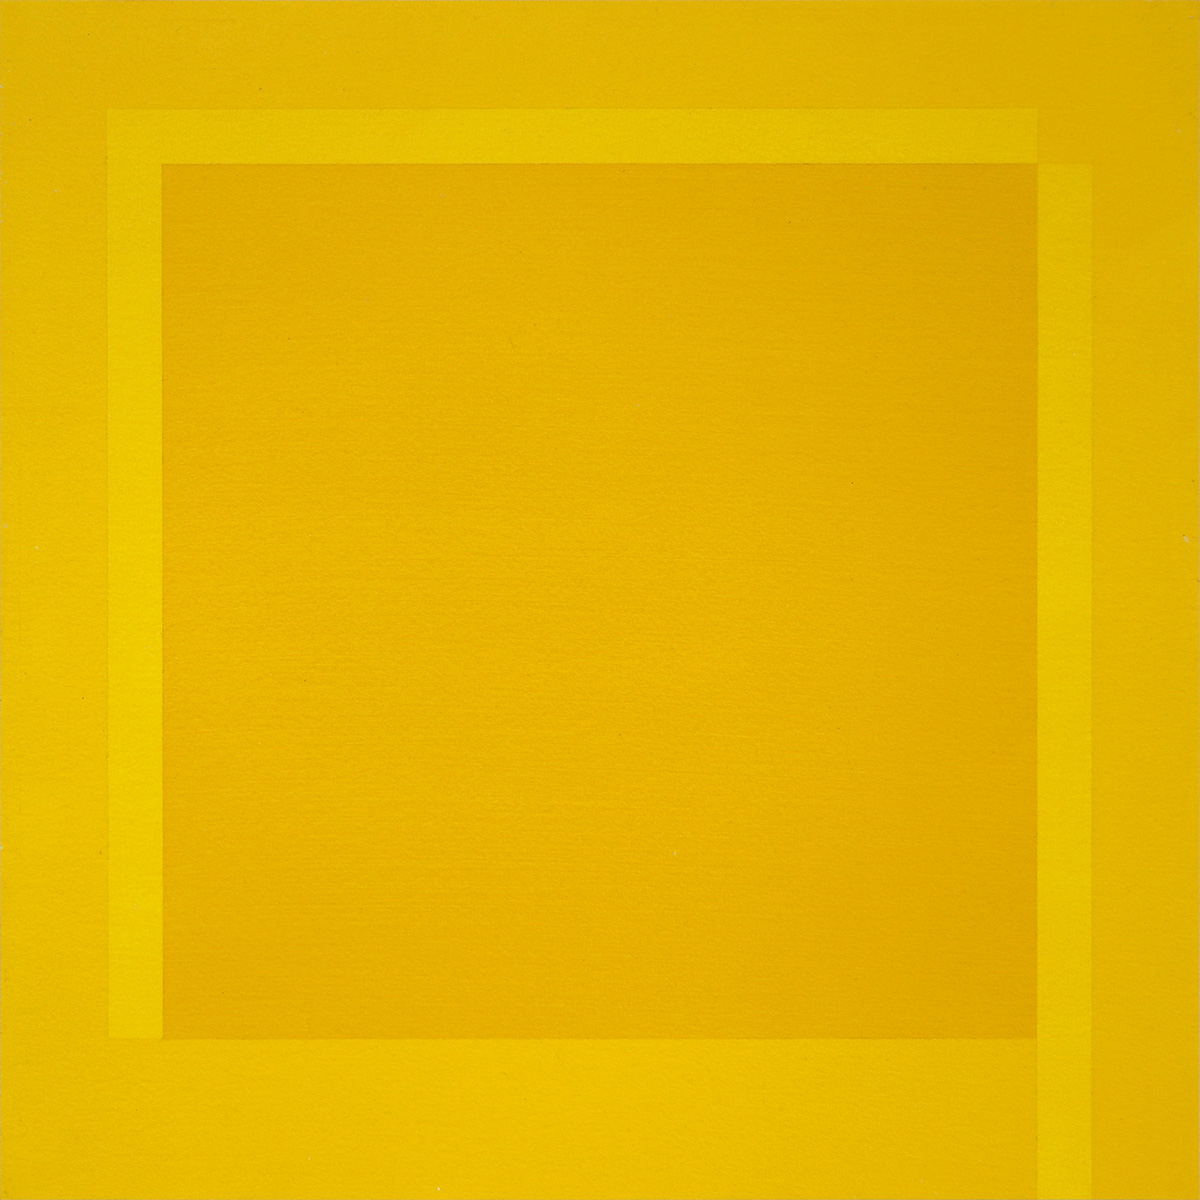 Dimensional painting 19 (yellow), 200655 x 55 cmAcrylic on paper, mounted on aludibond